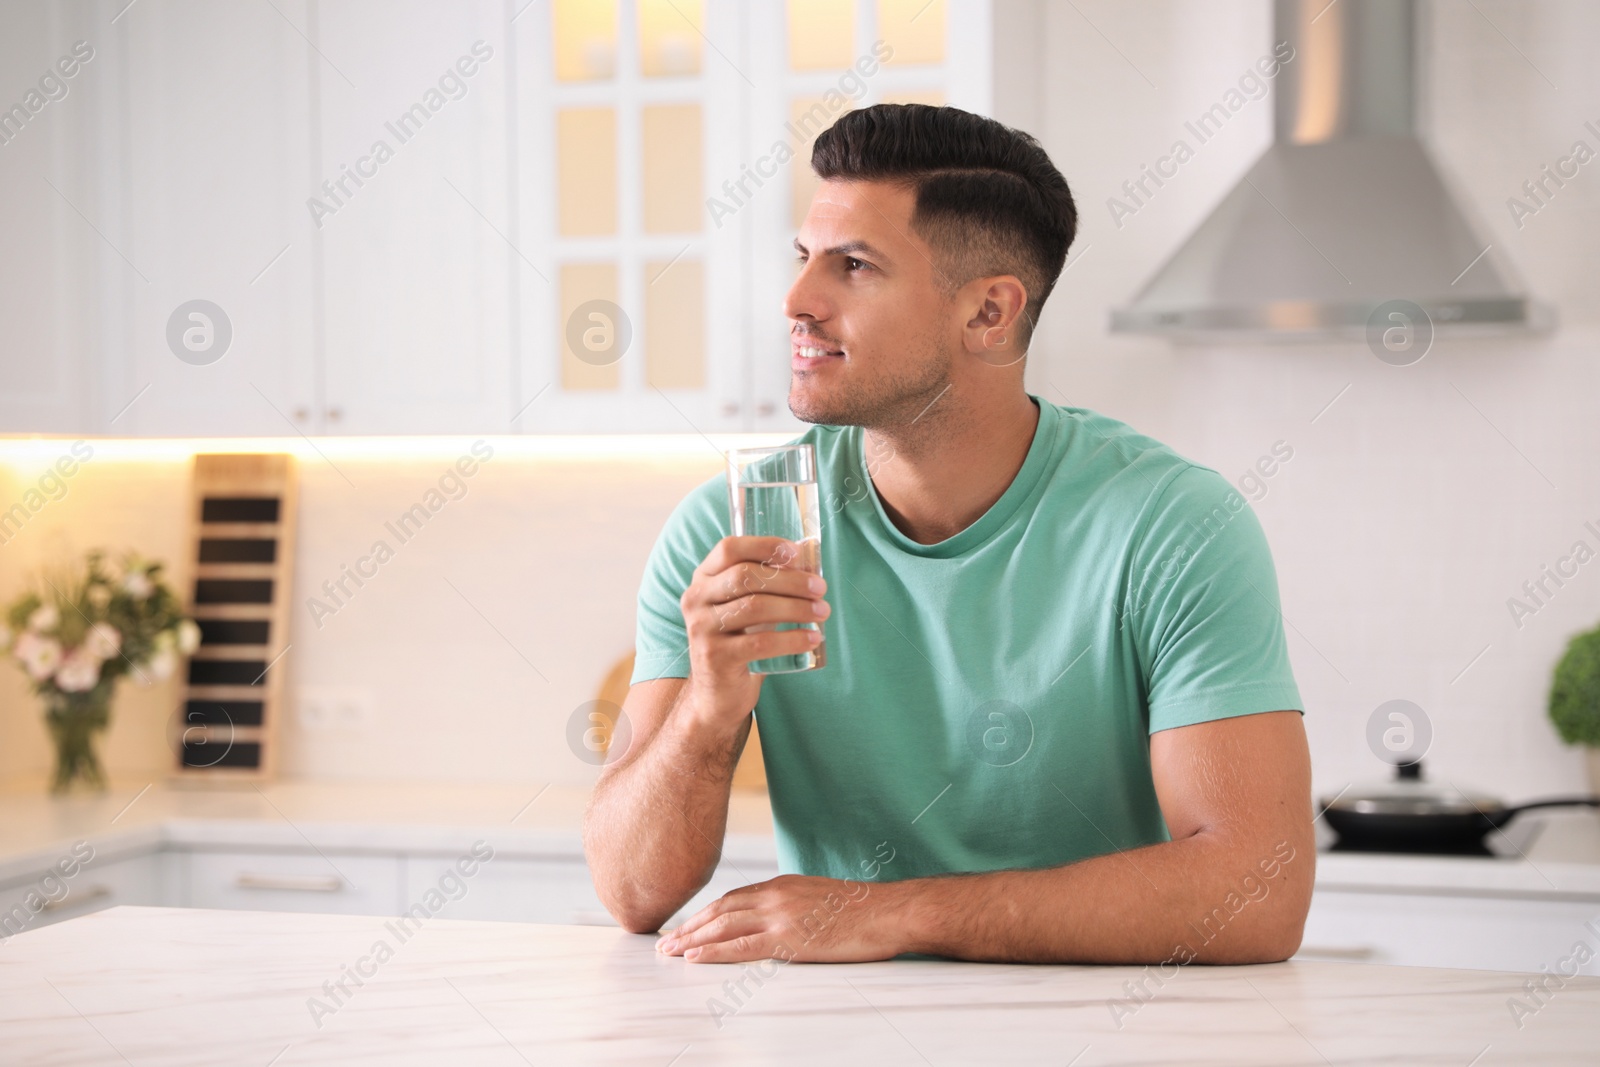 Photo of Man holding glass of pure water at table in kitchen